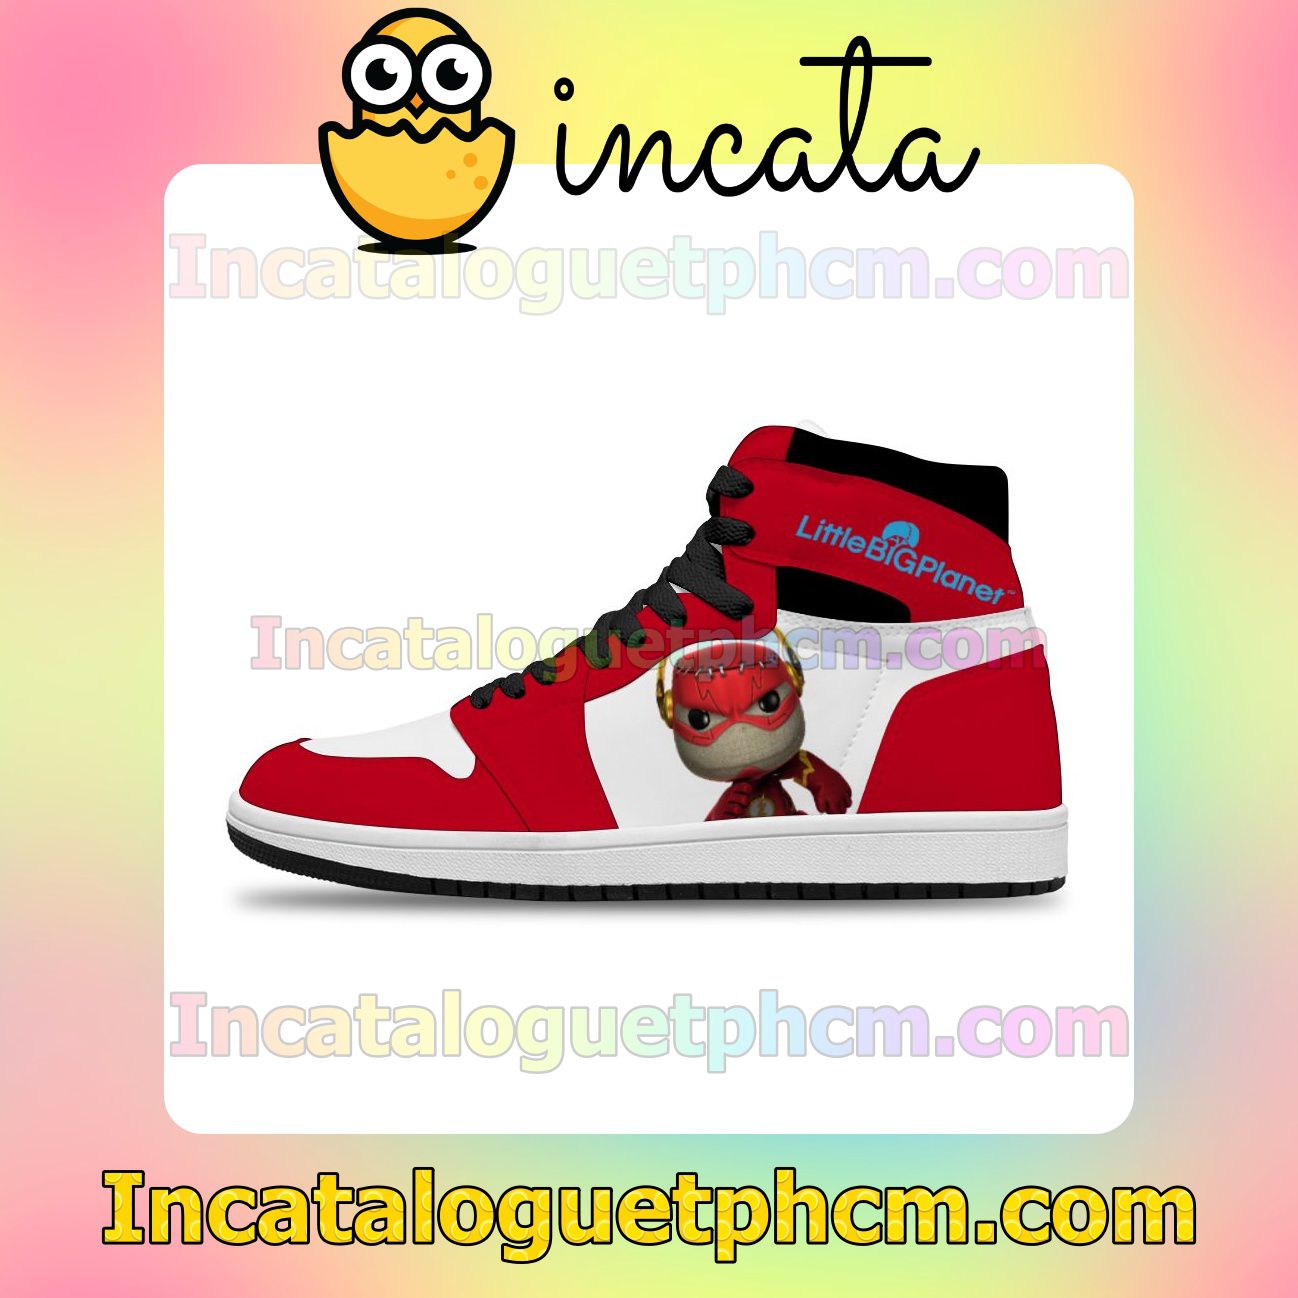 Little Big Planet Chicago-Red Air Jordan 1 Inspired Shoes